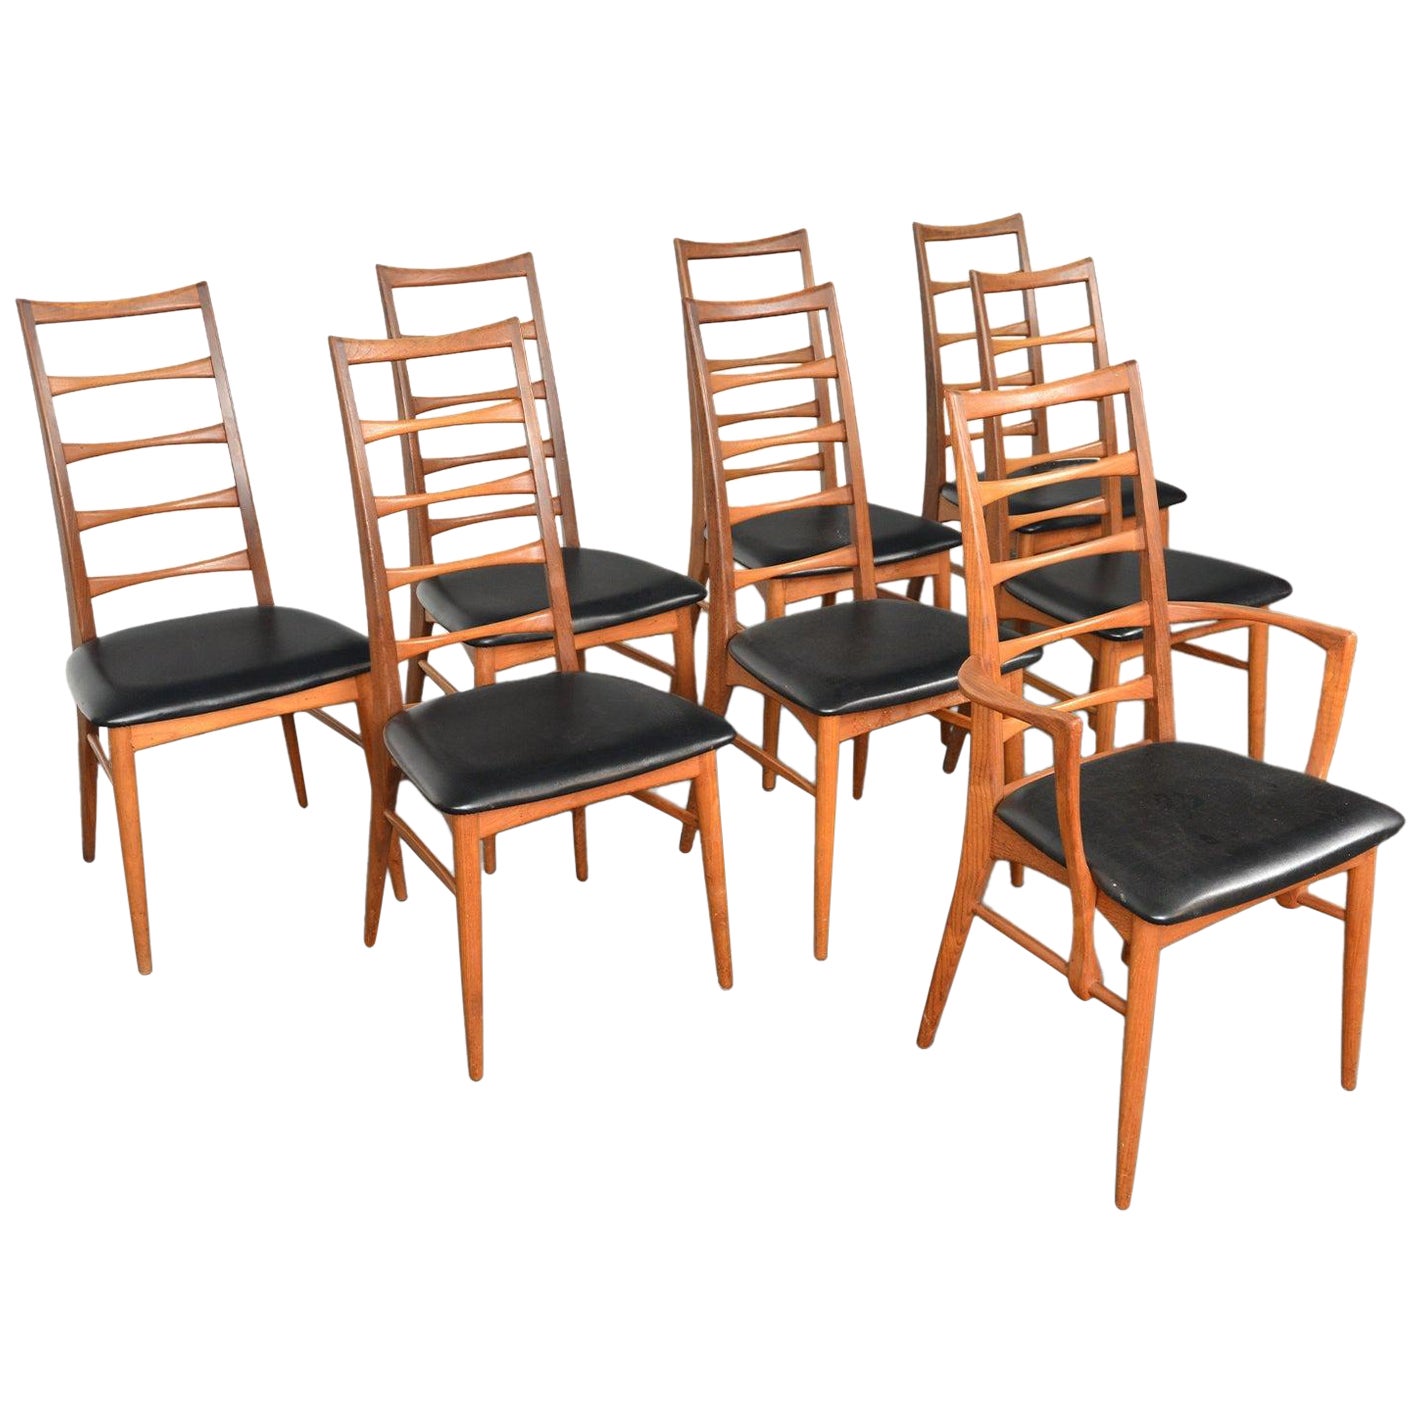 Set of Eight 'Lis' Highback Dining Chairs in Teak